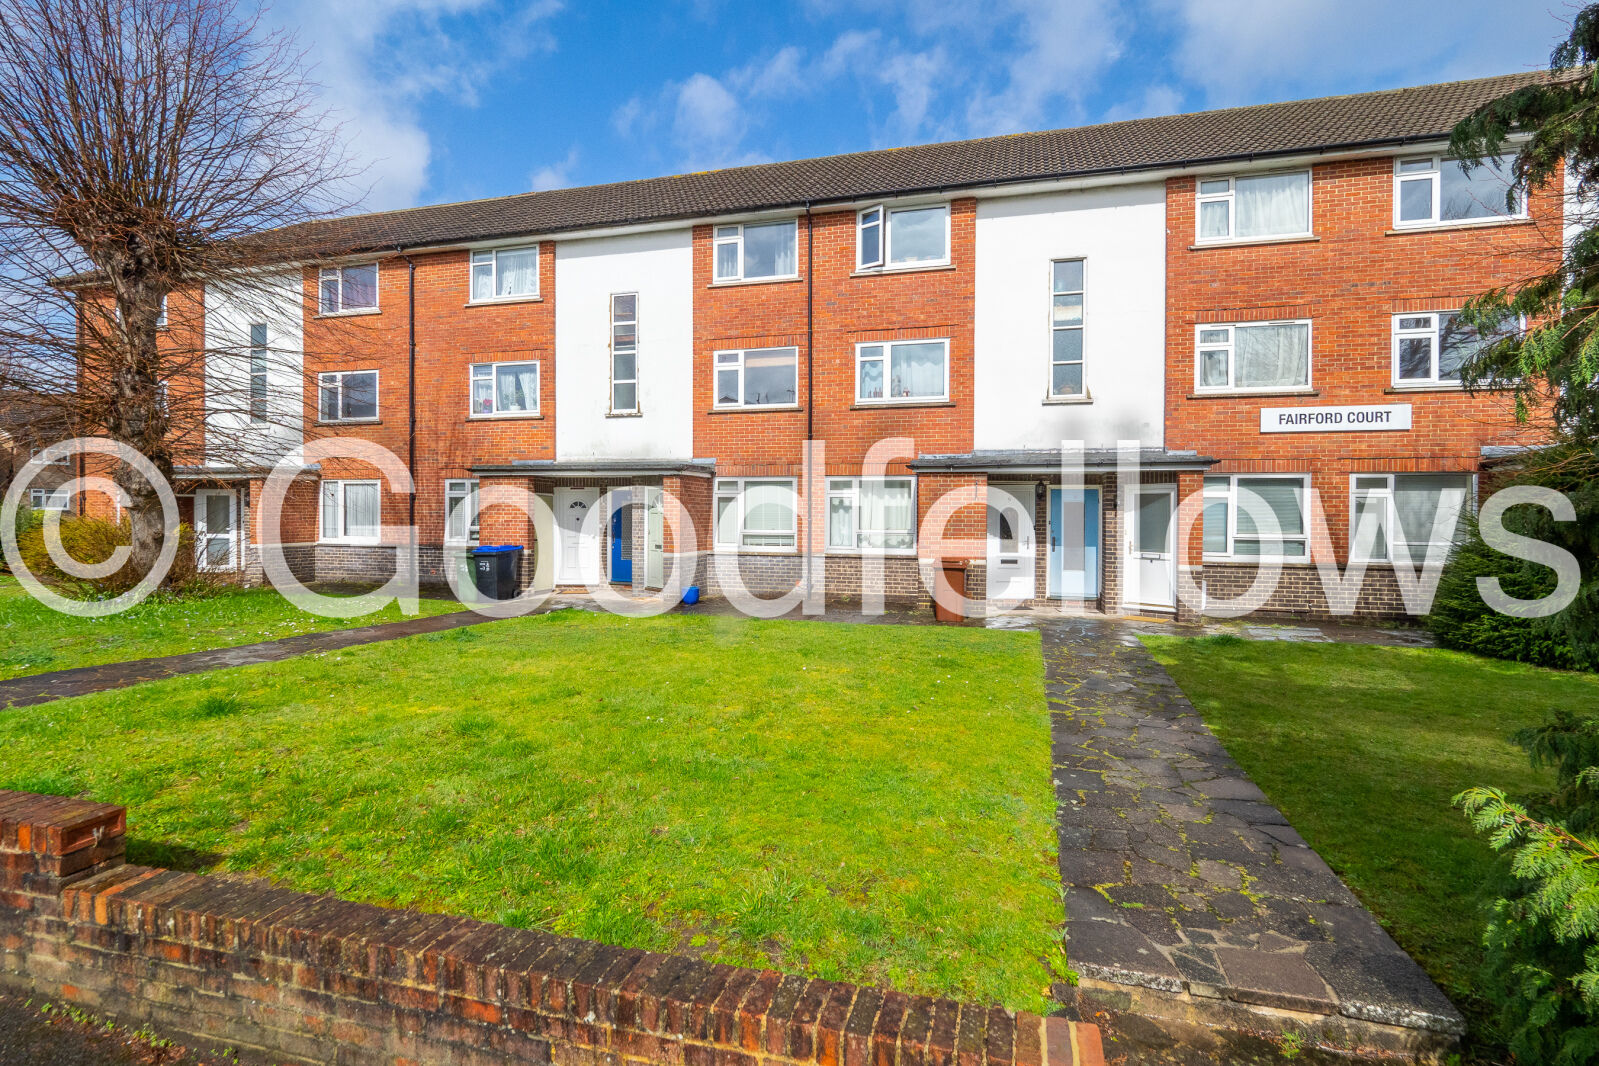 2 bedroom  flat to rent, Available from 22/04/2027 Fairford Court, Grange Road, SM2, main image